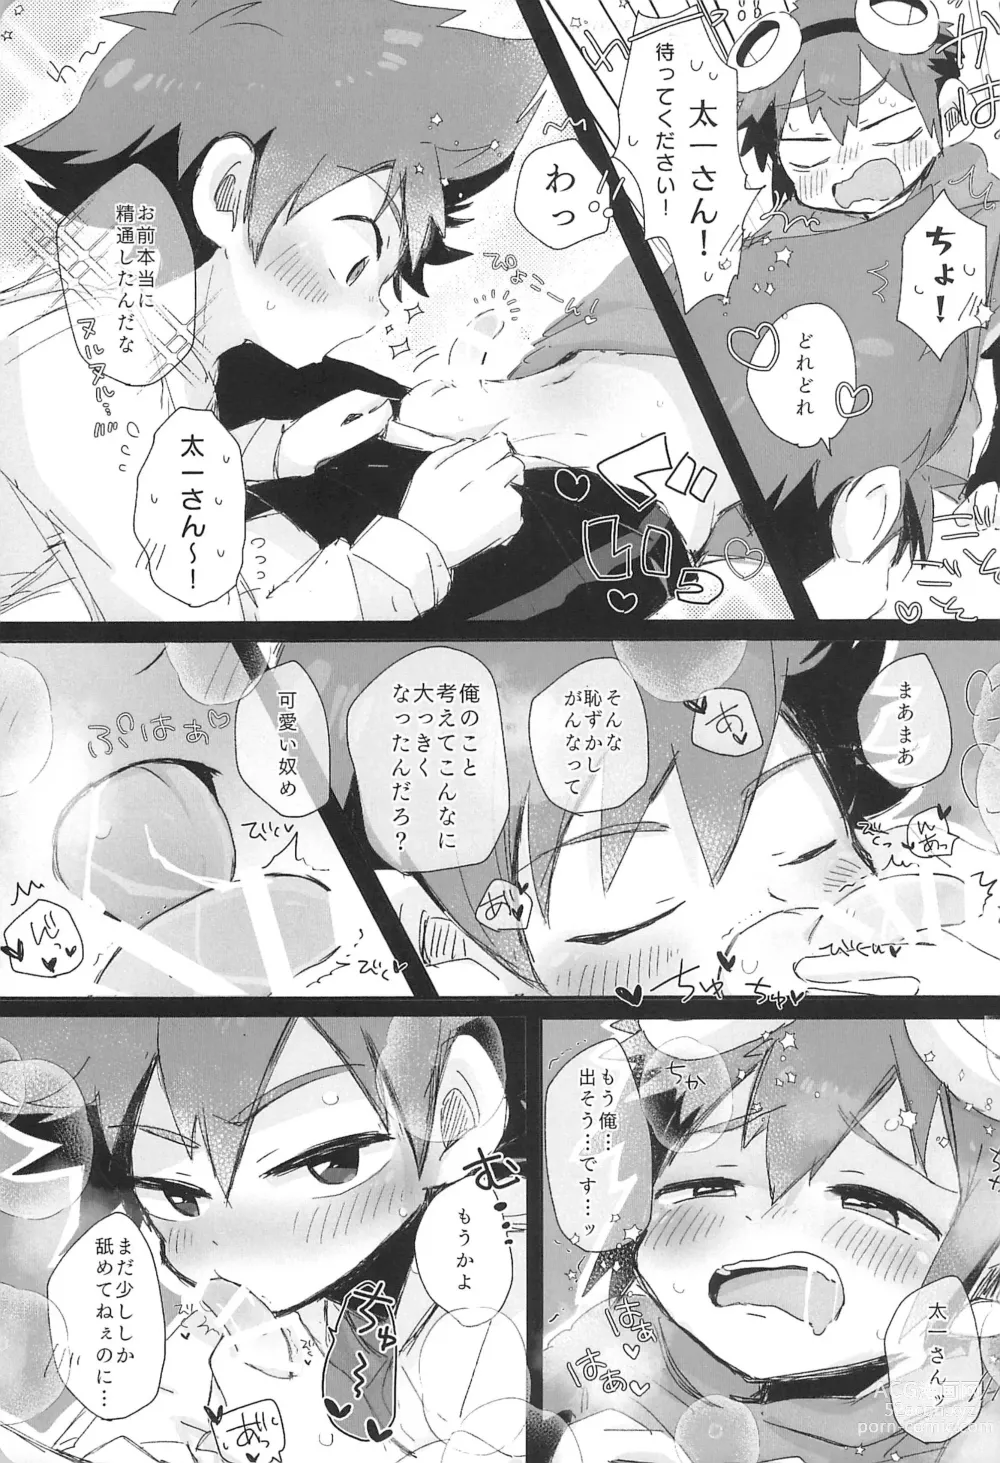 Page 19 of doujinshi Re:Re: